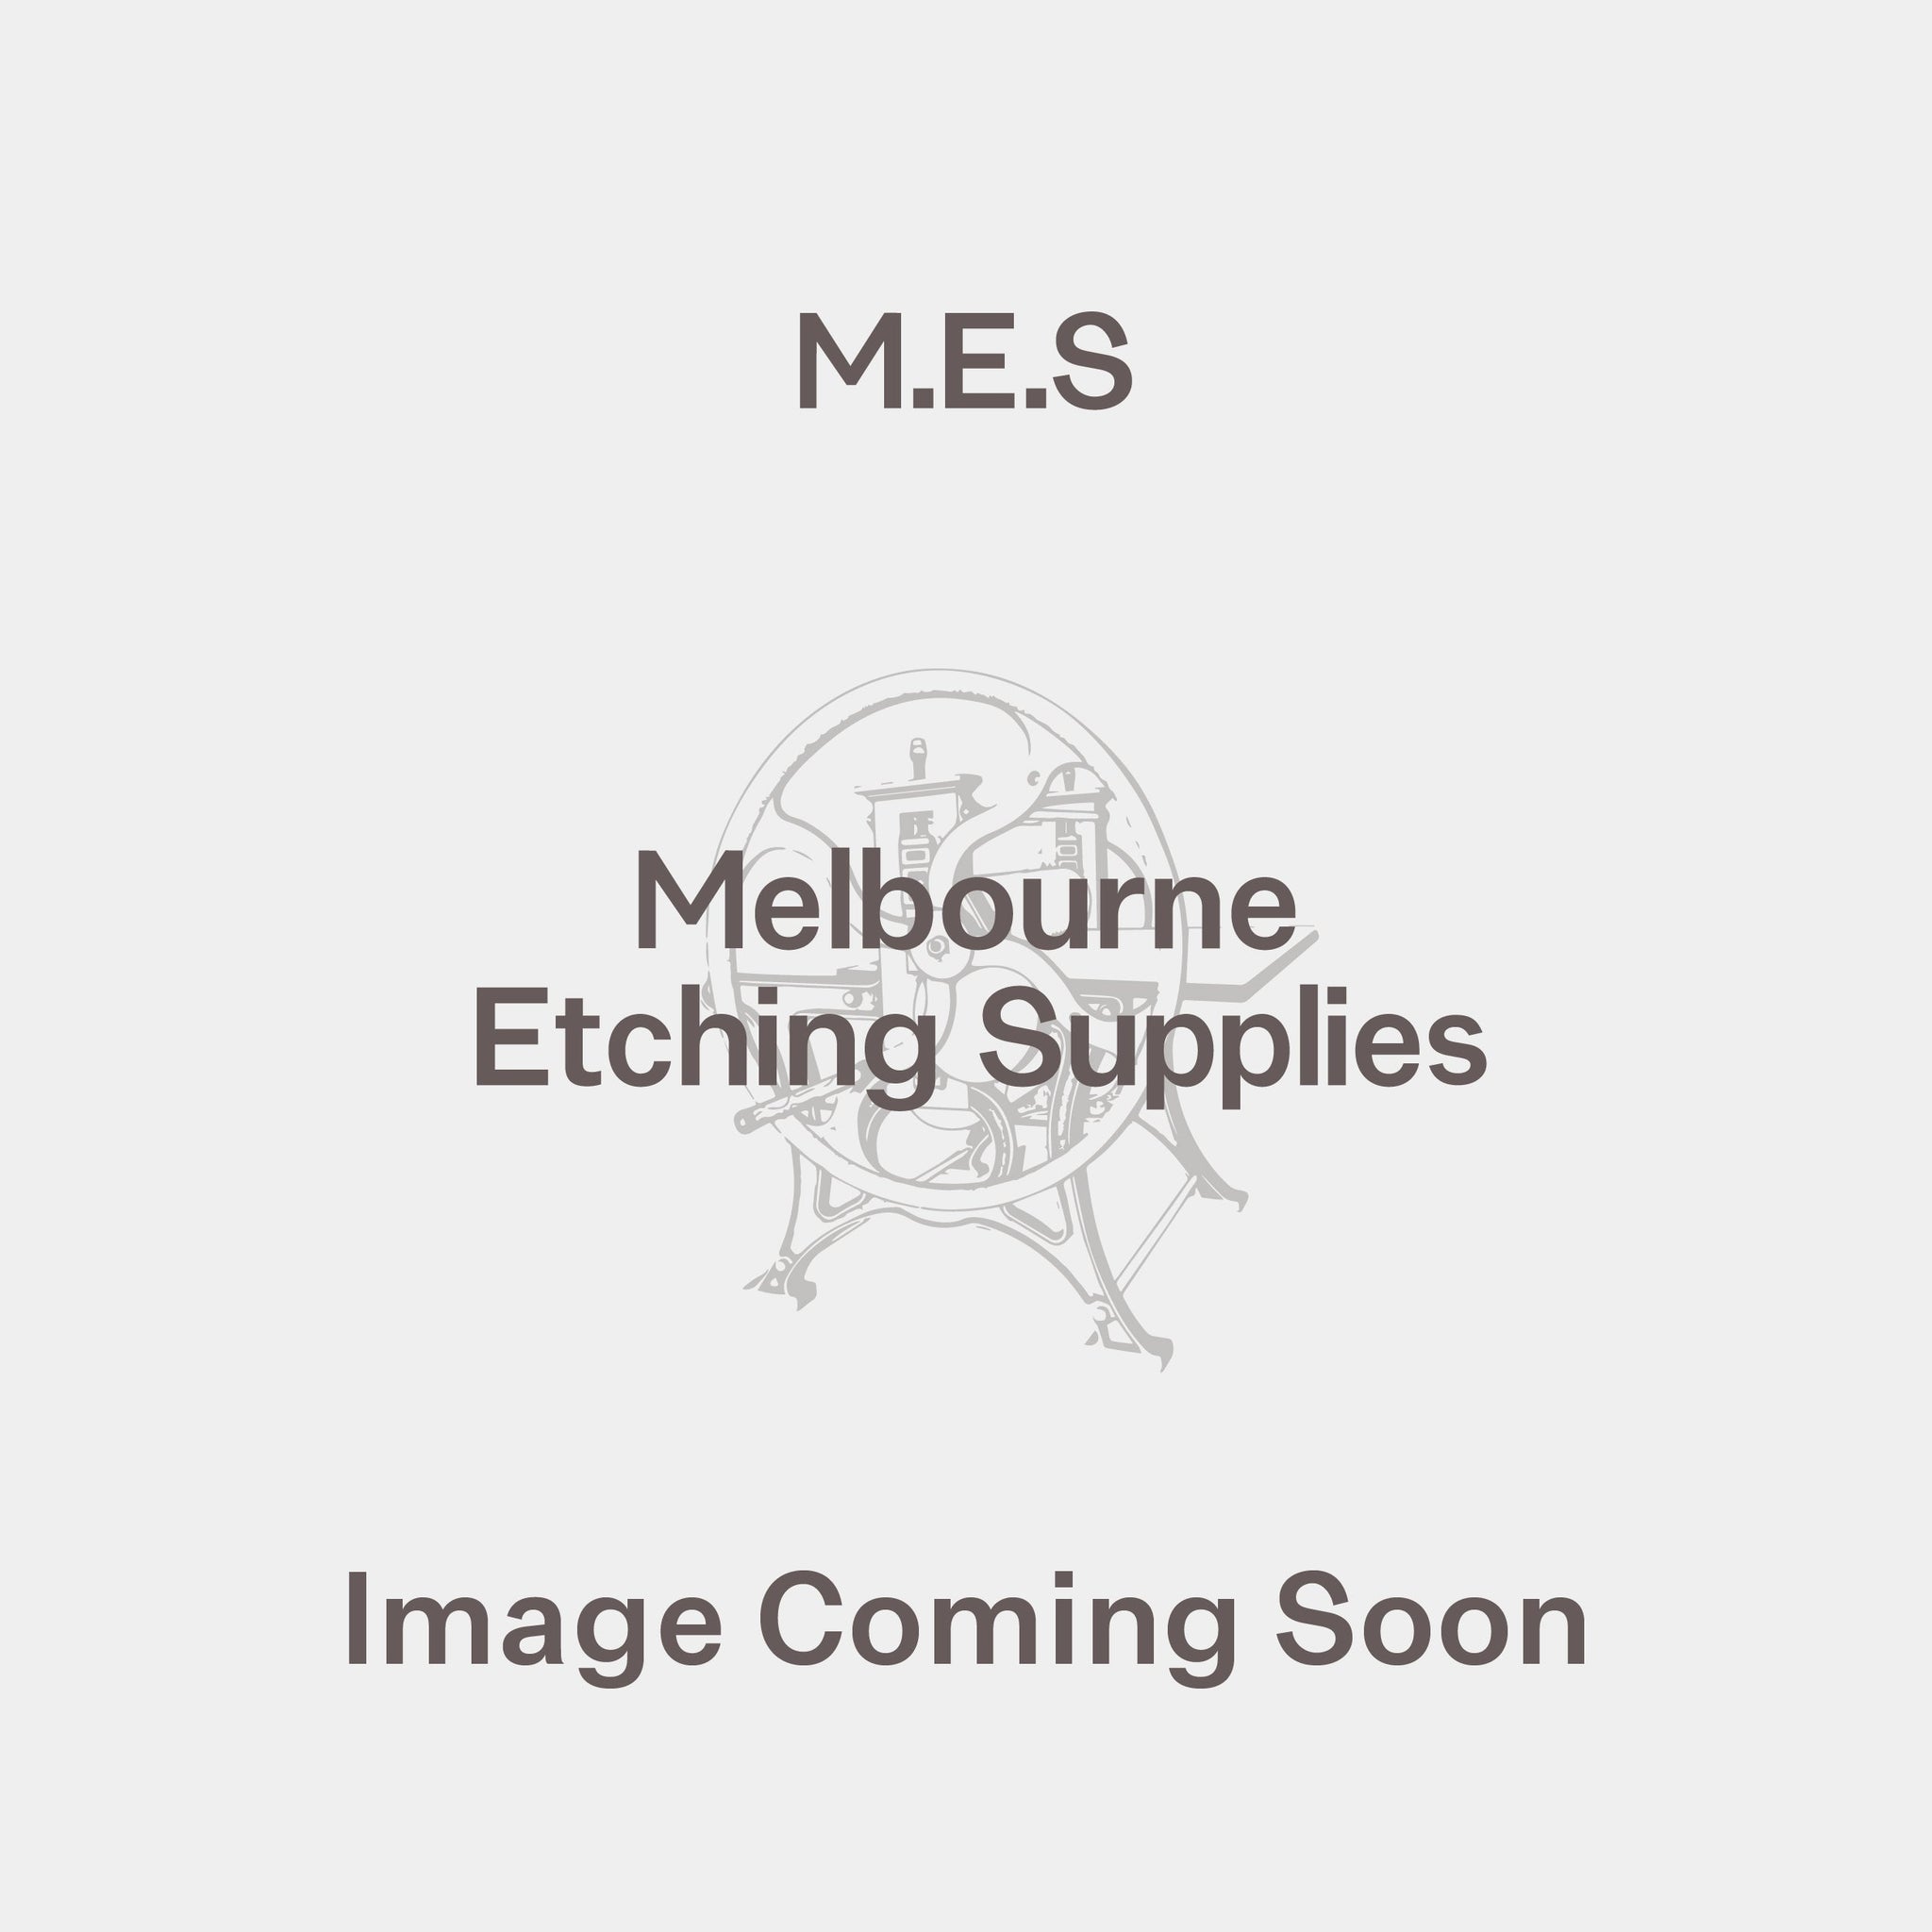 Fabriano 5 Disegno - Melbourne Etching Supplies